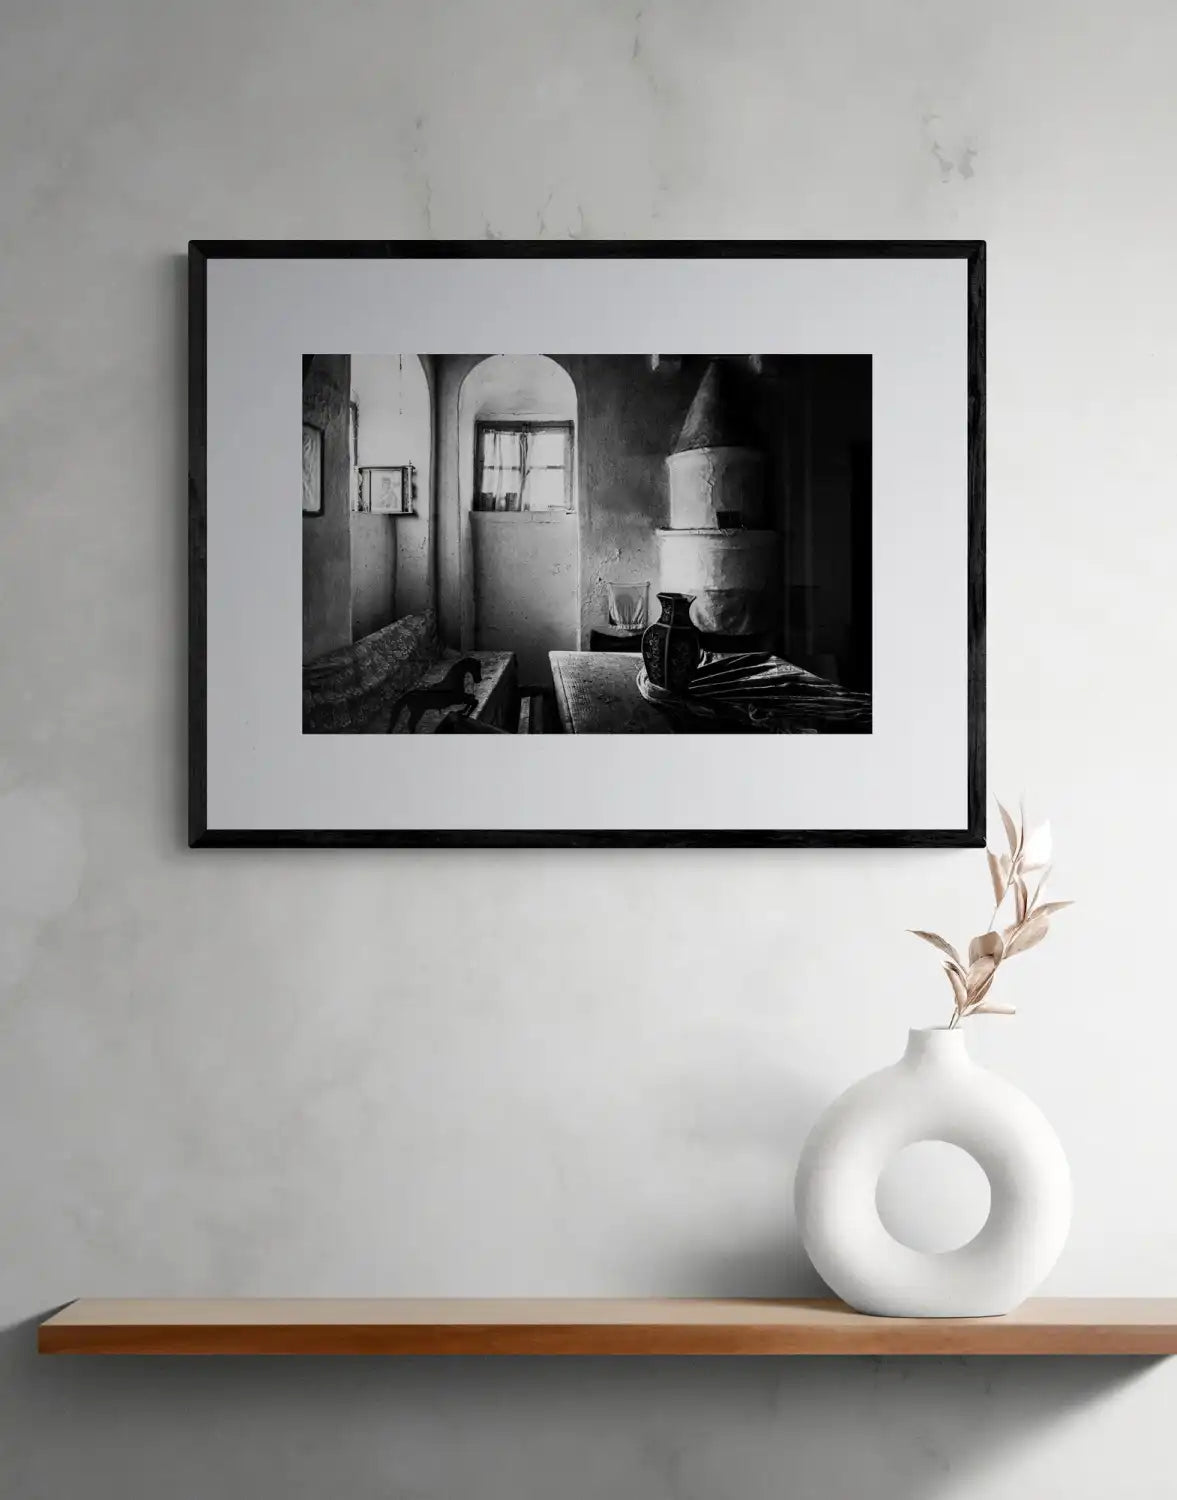 Filiates, Thesprotia, Epirus, Greece | Interior with Fireplace | Black-and-White Wall Art Photography - single print framed